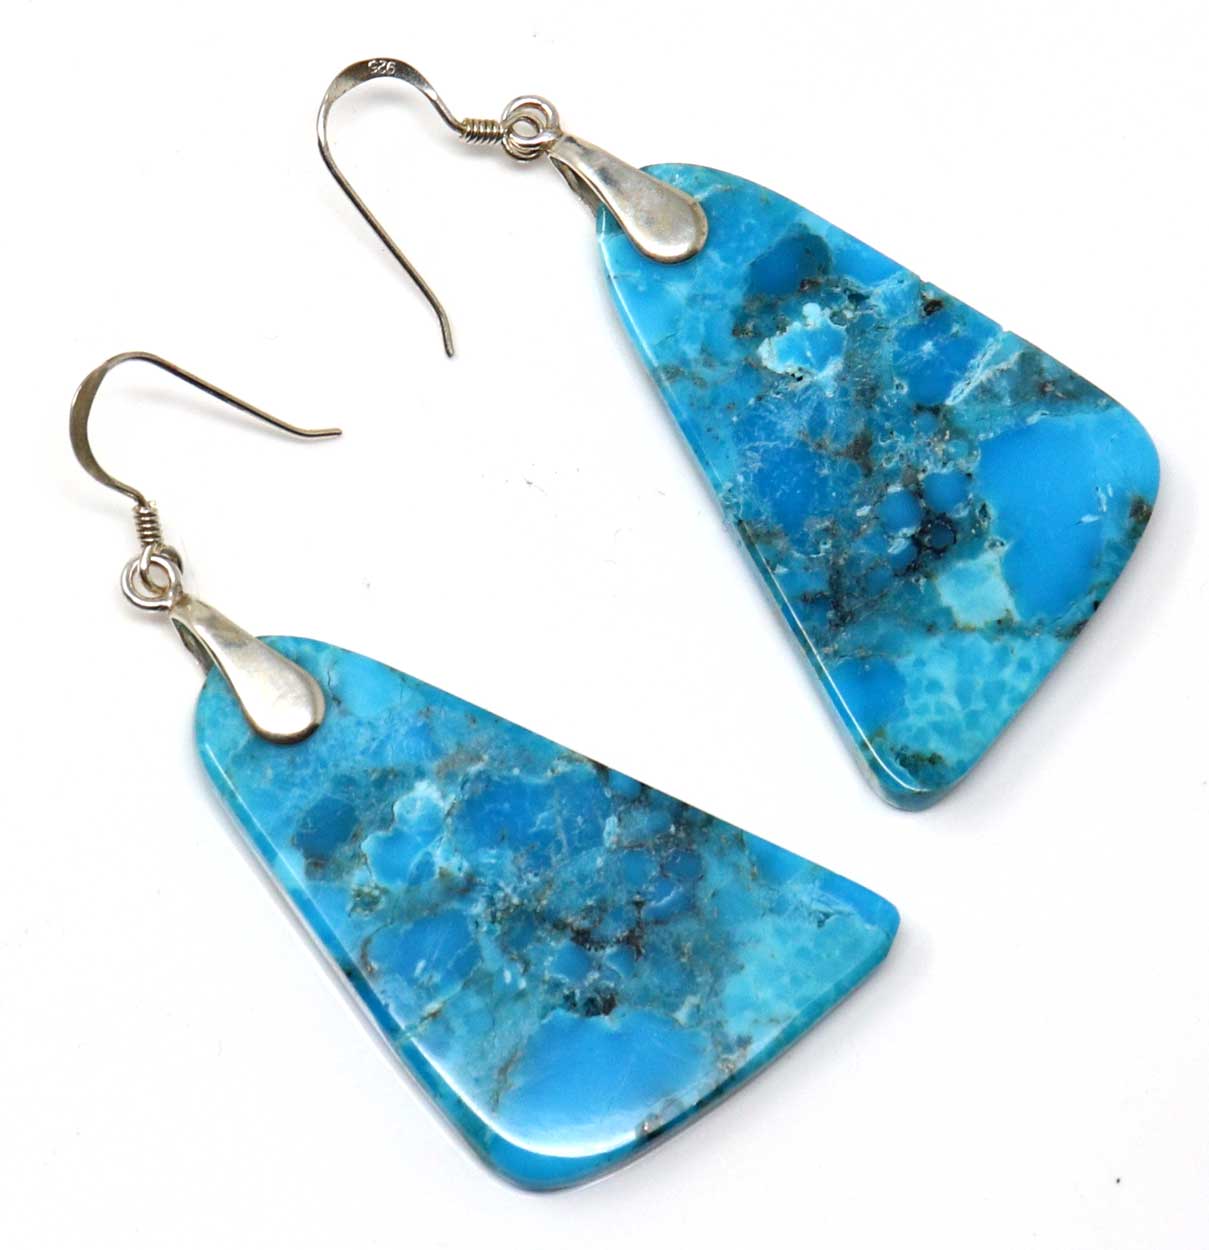 Load image into Gallery viewer, Rectangular Turquoise Slab Earrings by Garcia
